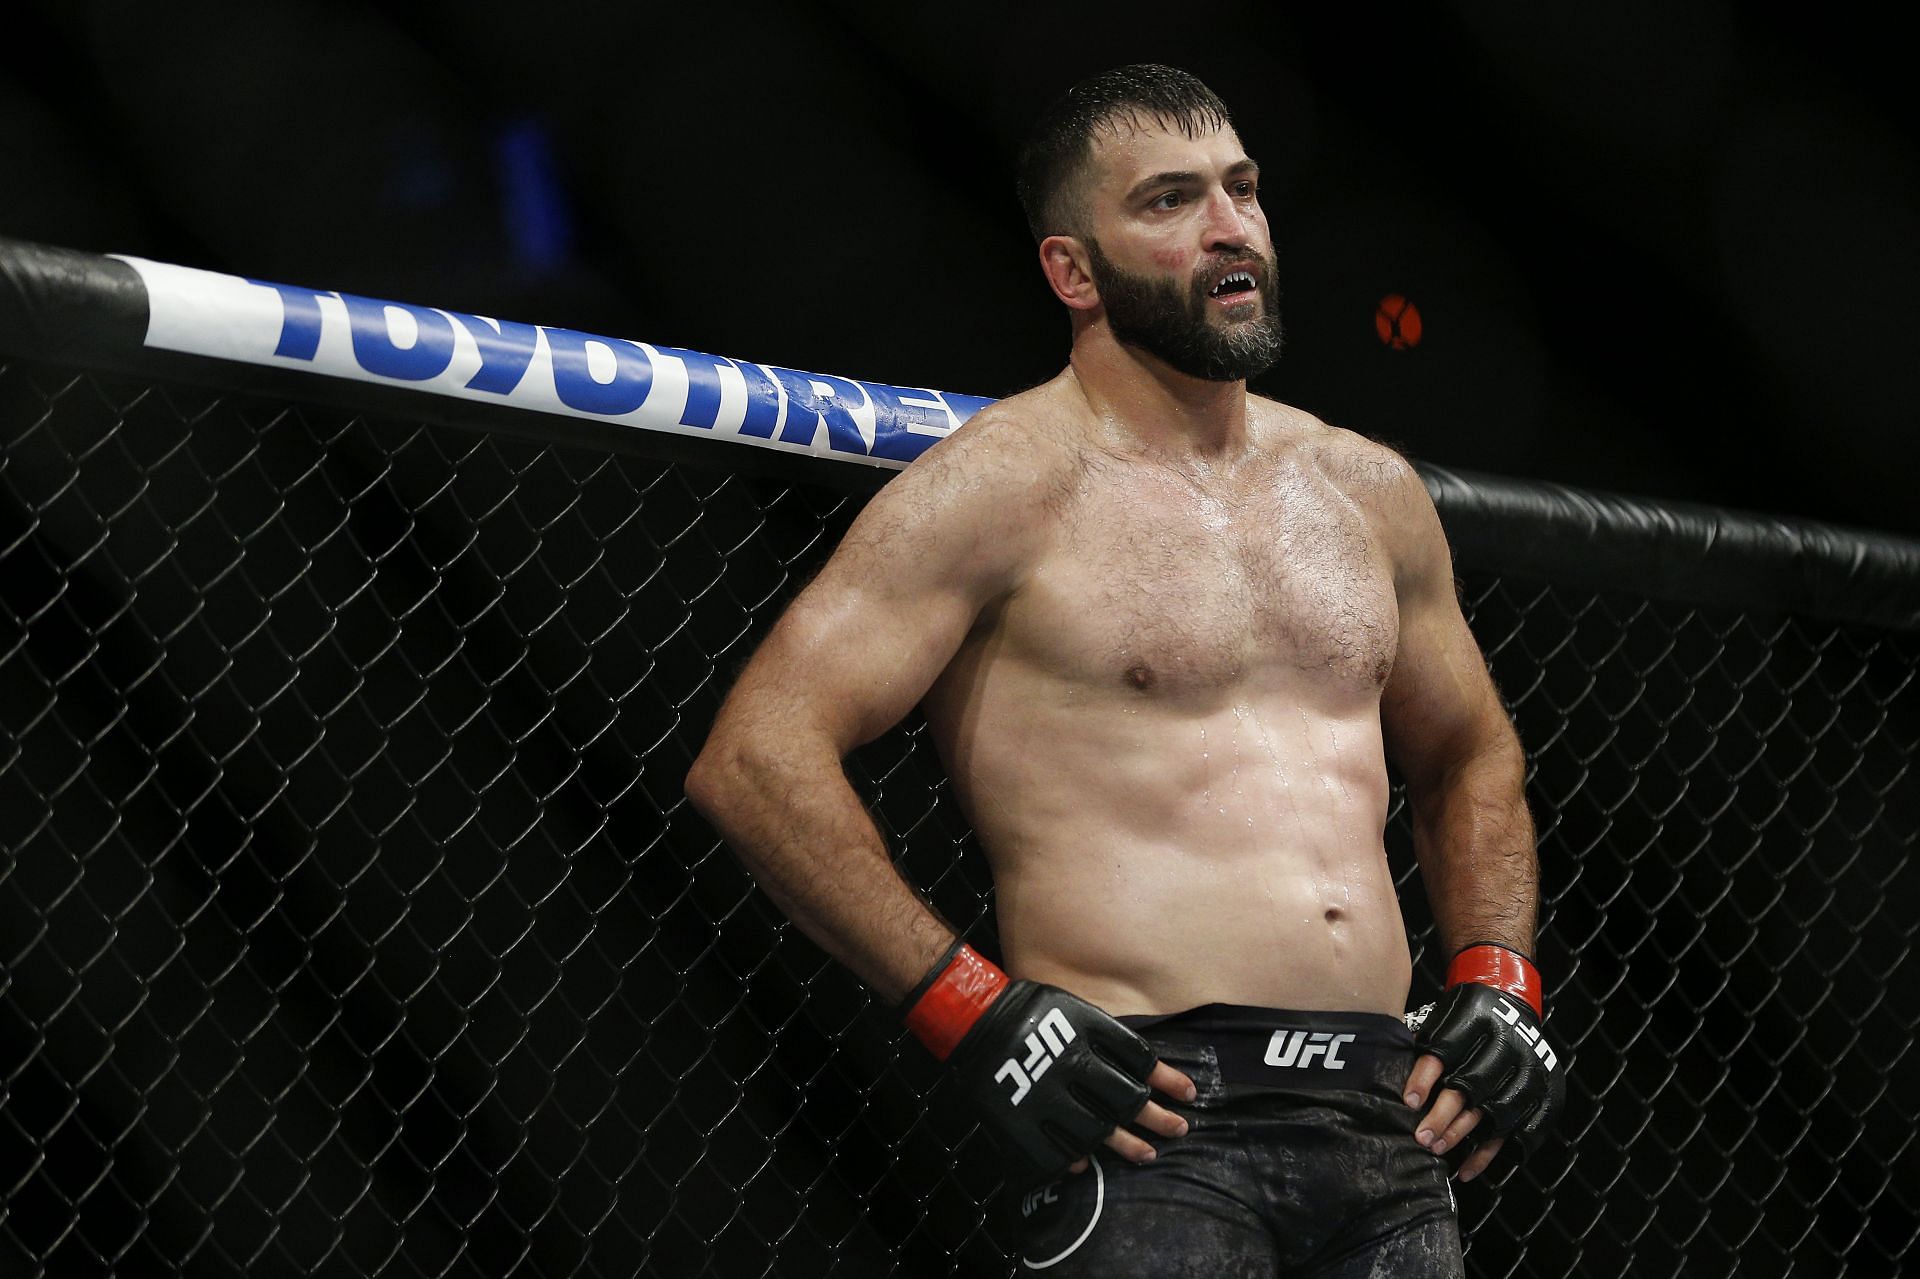 Andrei Arlovski holds a record of 33-20 (2 NC).